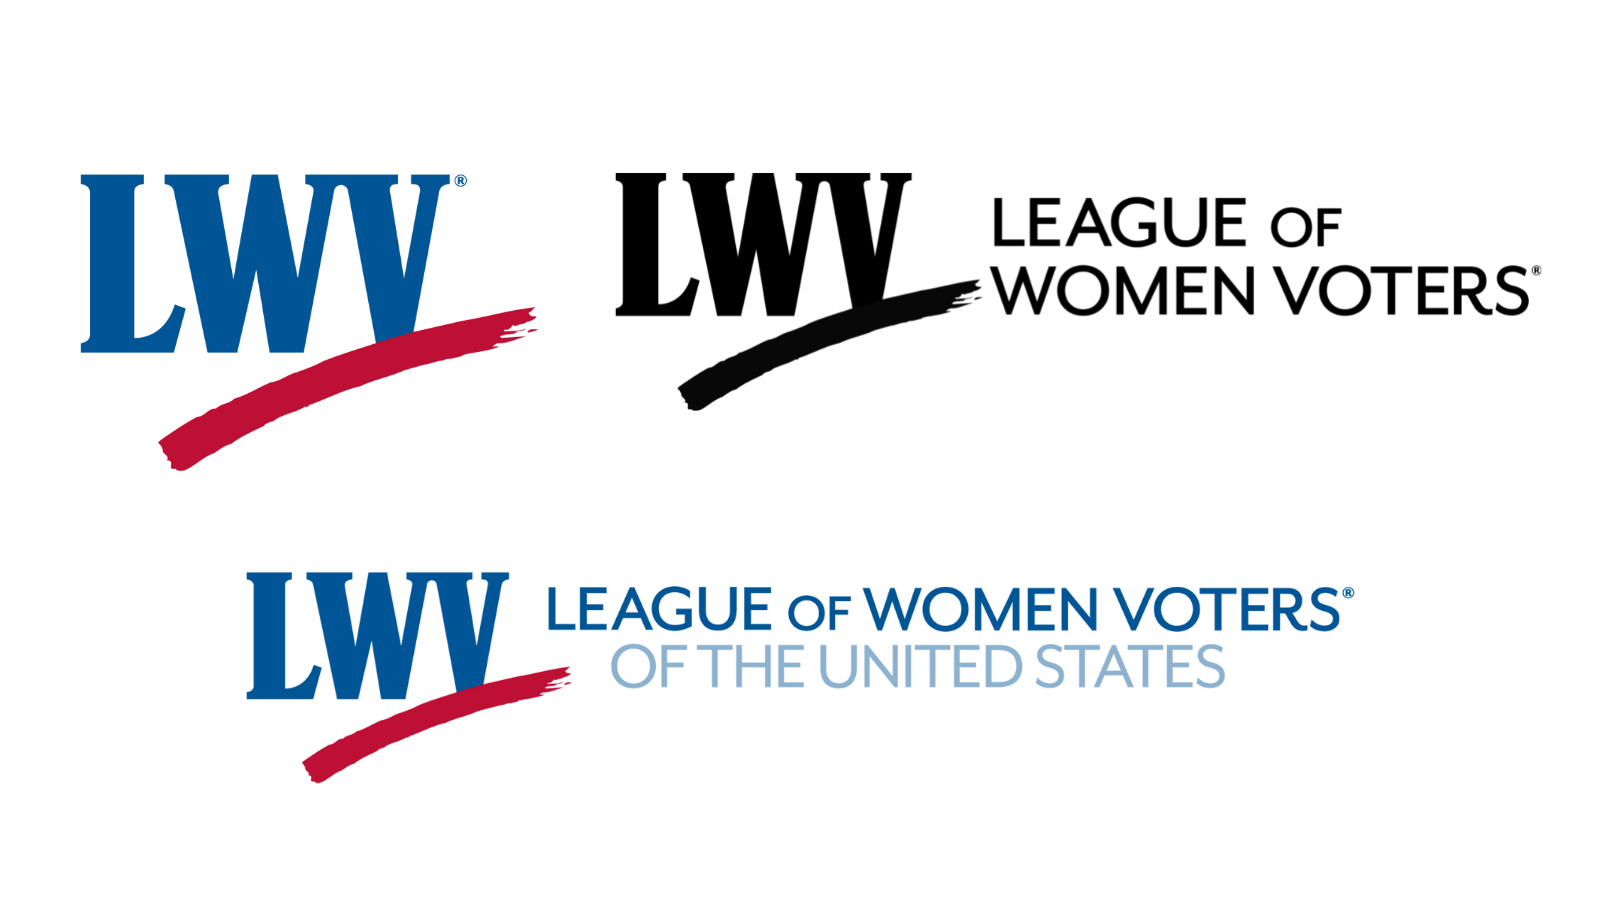 Sample logos/graphics outlined in LWVUS Brand Standards